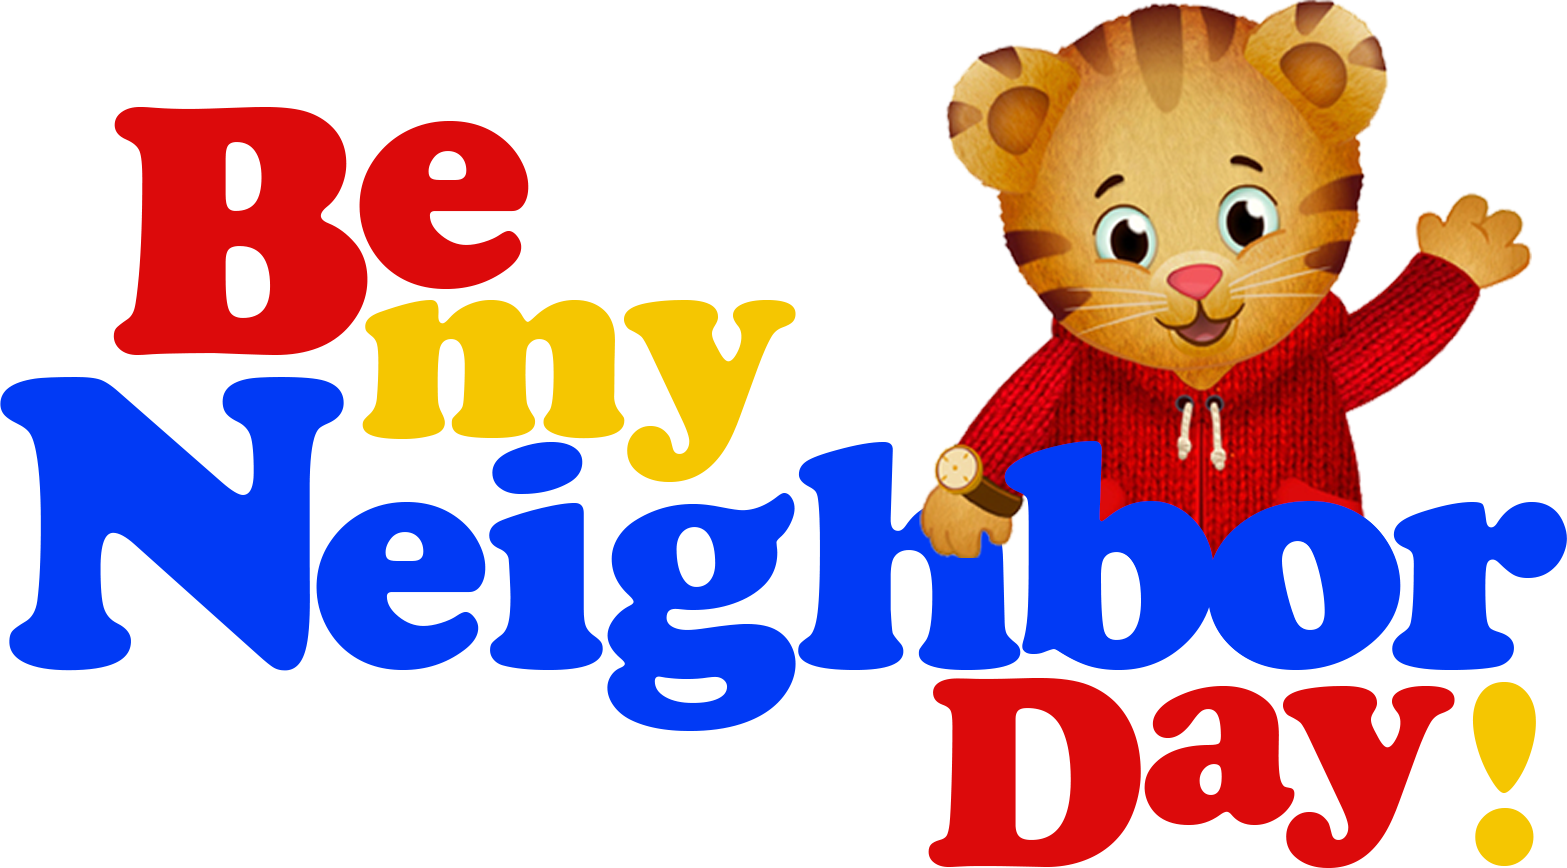 Be My Neighbor Day 2023 is April 29 at WSRE